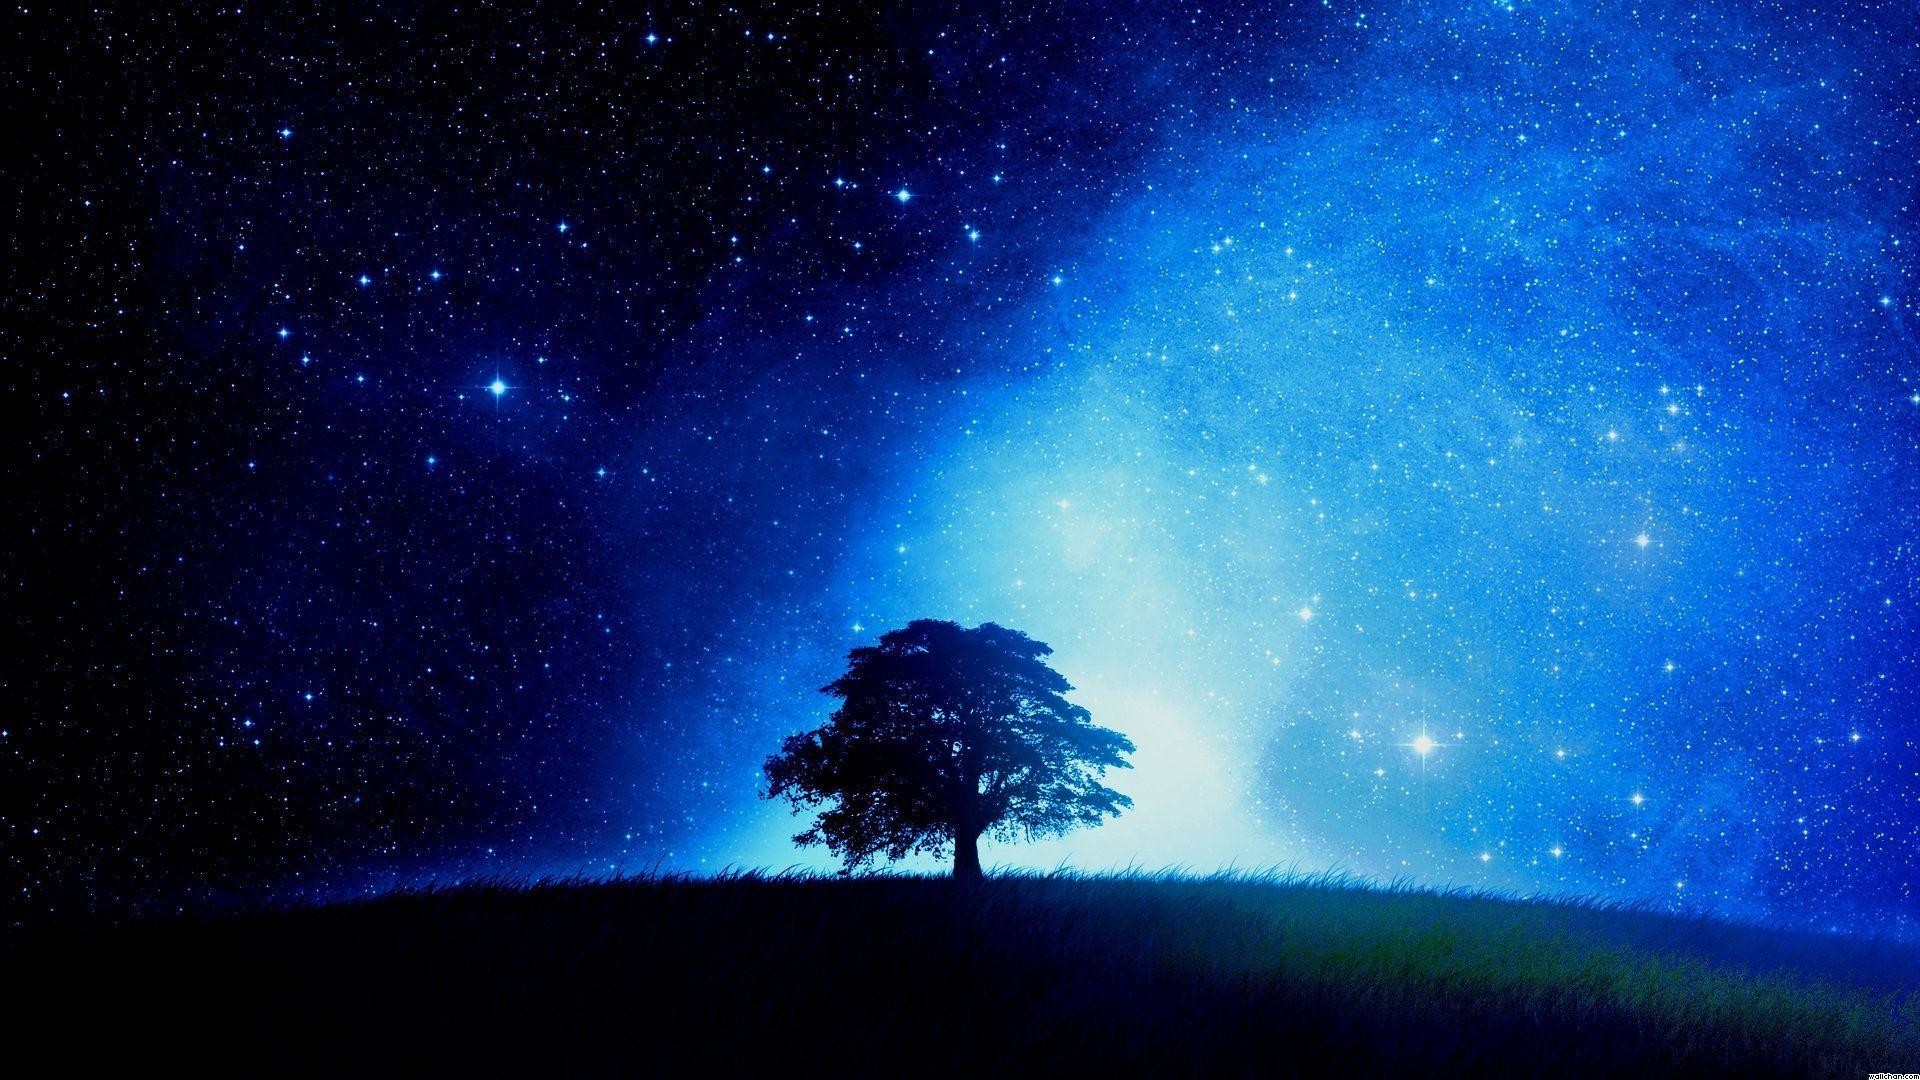 1920x1080 Starry Night Sky Wallpaper 30952 Wallpapers HD | Hdpictureimages.